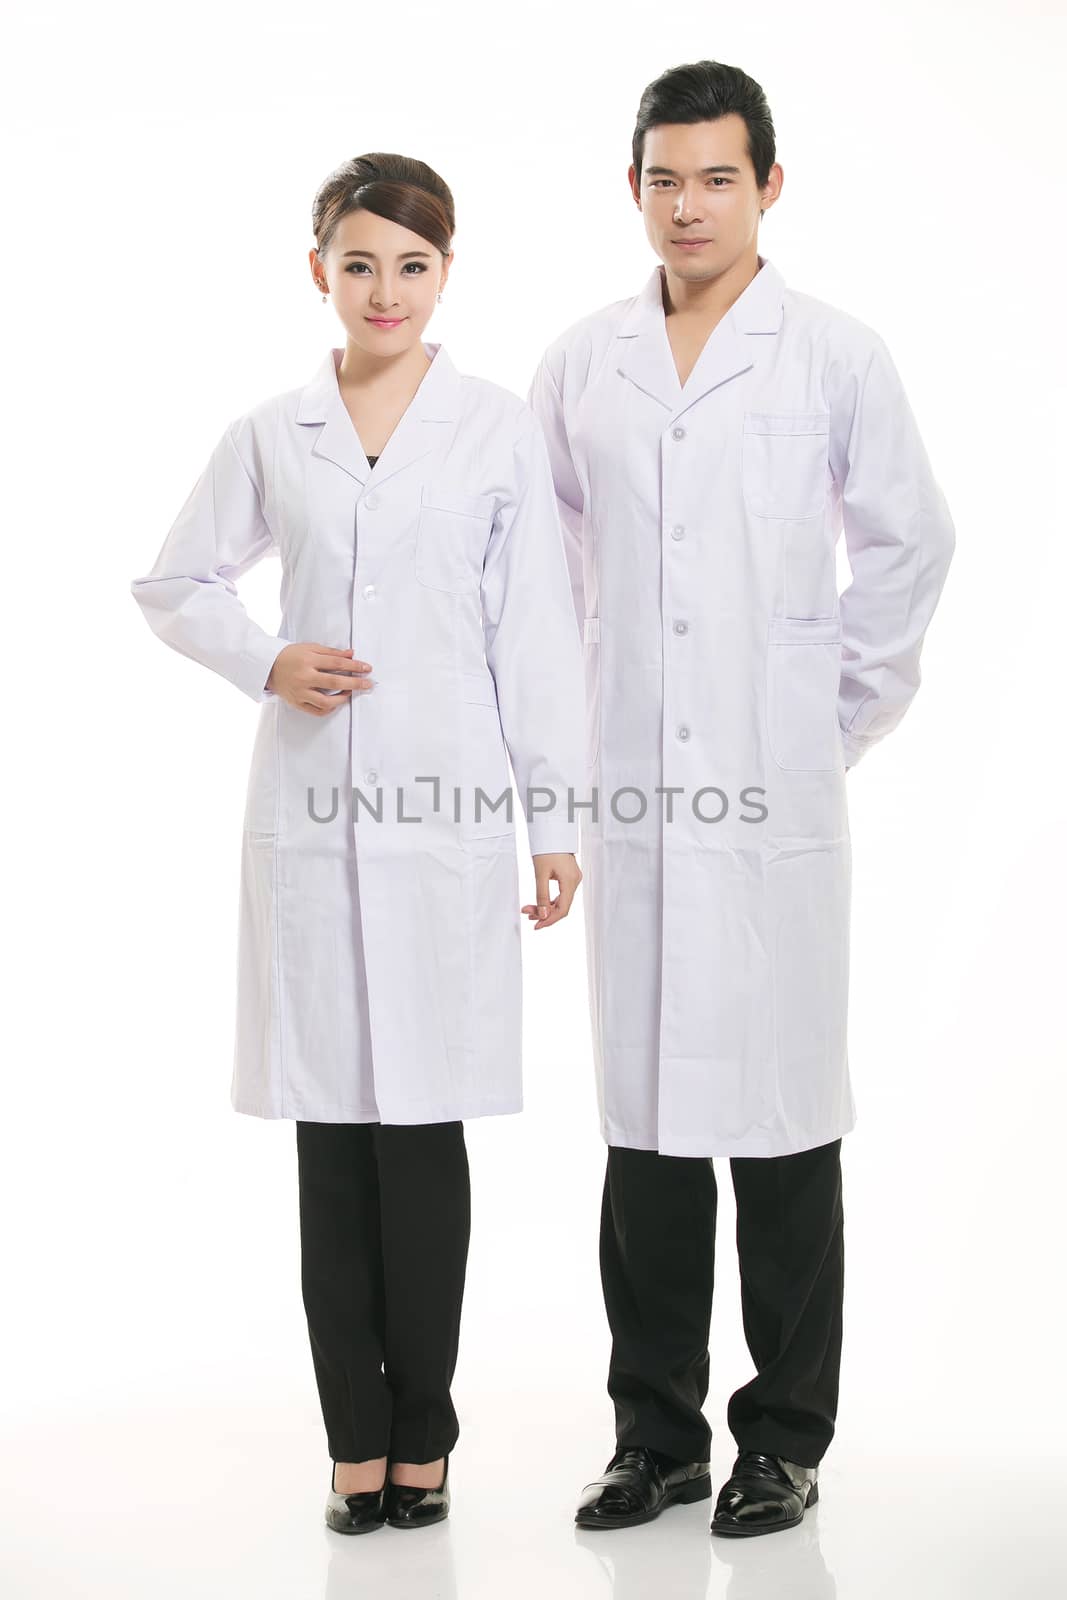 Staff wear coats in front of white background by quweichang